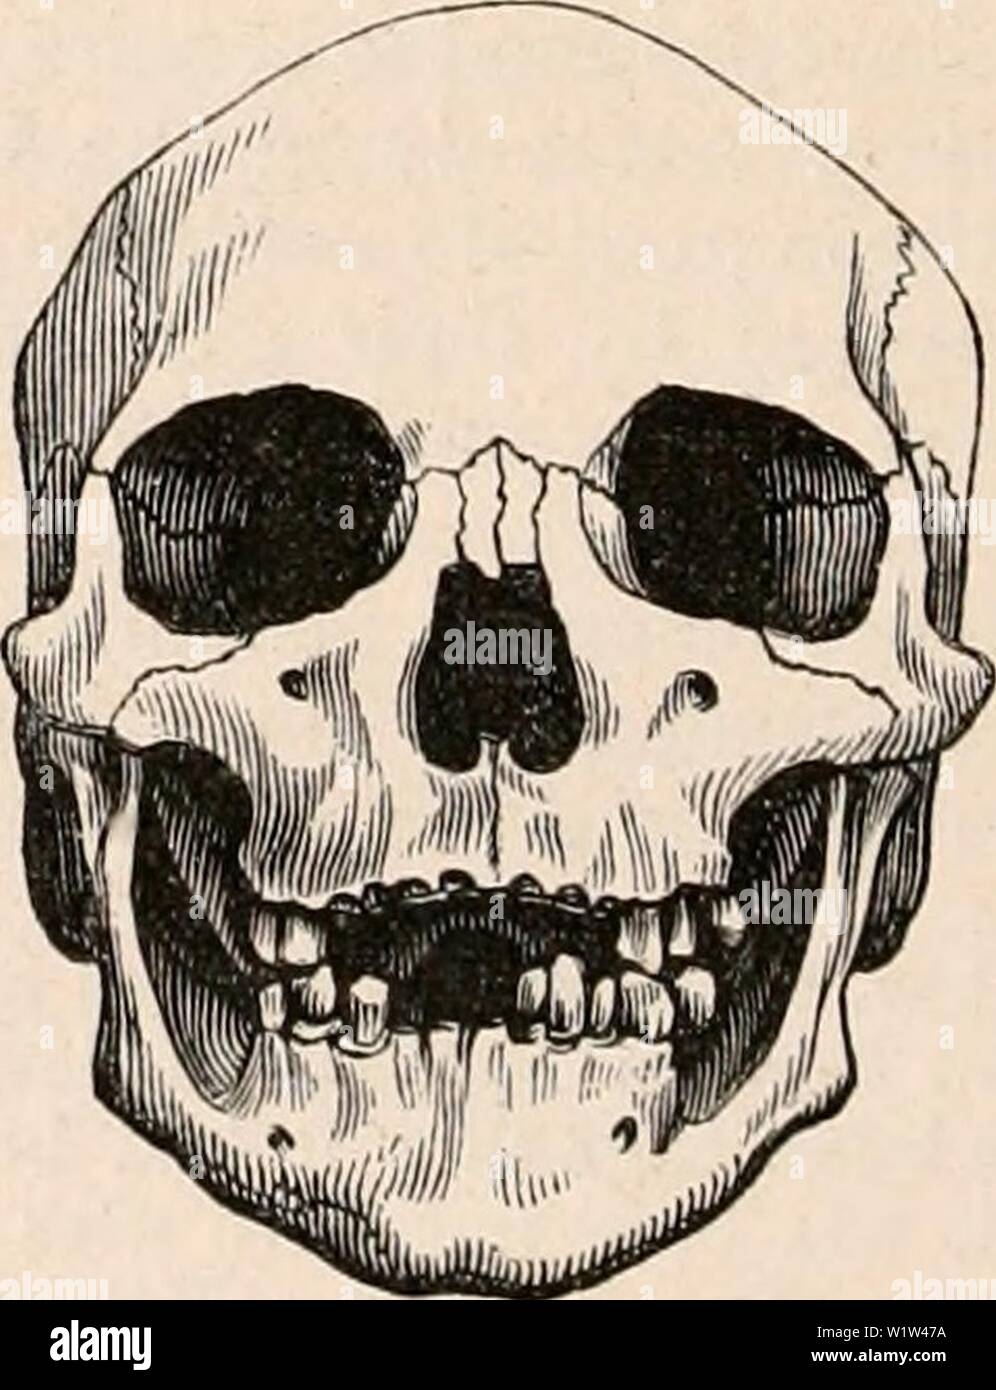 Archive image from page 565 of The cyclopædia of anatomy and. The cyclopædia of anatomy and physiology  cyclopdiaofana0402todd Year: 1849 the colour darker, but the cheek bones are more prominent, the hair coarse, scanty, and straight, the nose flattened; and sometimes the lips are very thick, and the jaws project, so that we have indications of a transition towards both the pyramidal and the progna- thous types. The south-western portion of Asia is occu- pied by the Arabs and other Semitic races, which, as will be presently explained, form the transition between the proper Asiatic and pro- pe Stock Photo